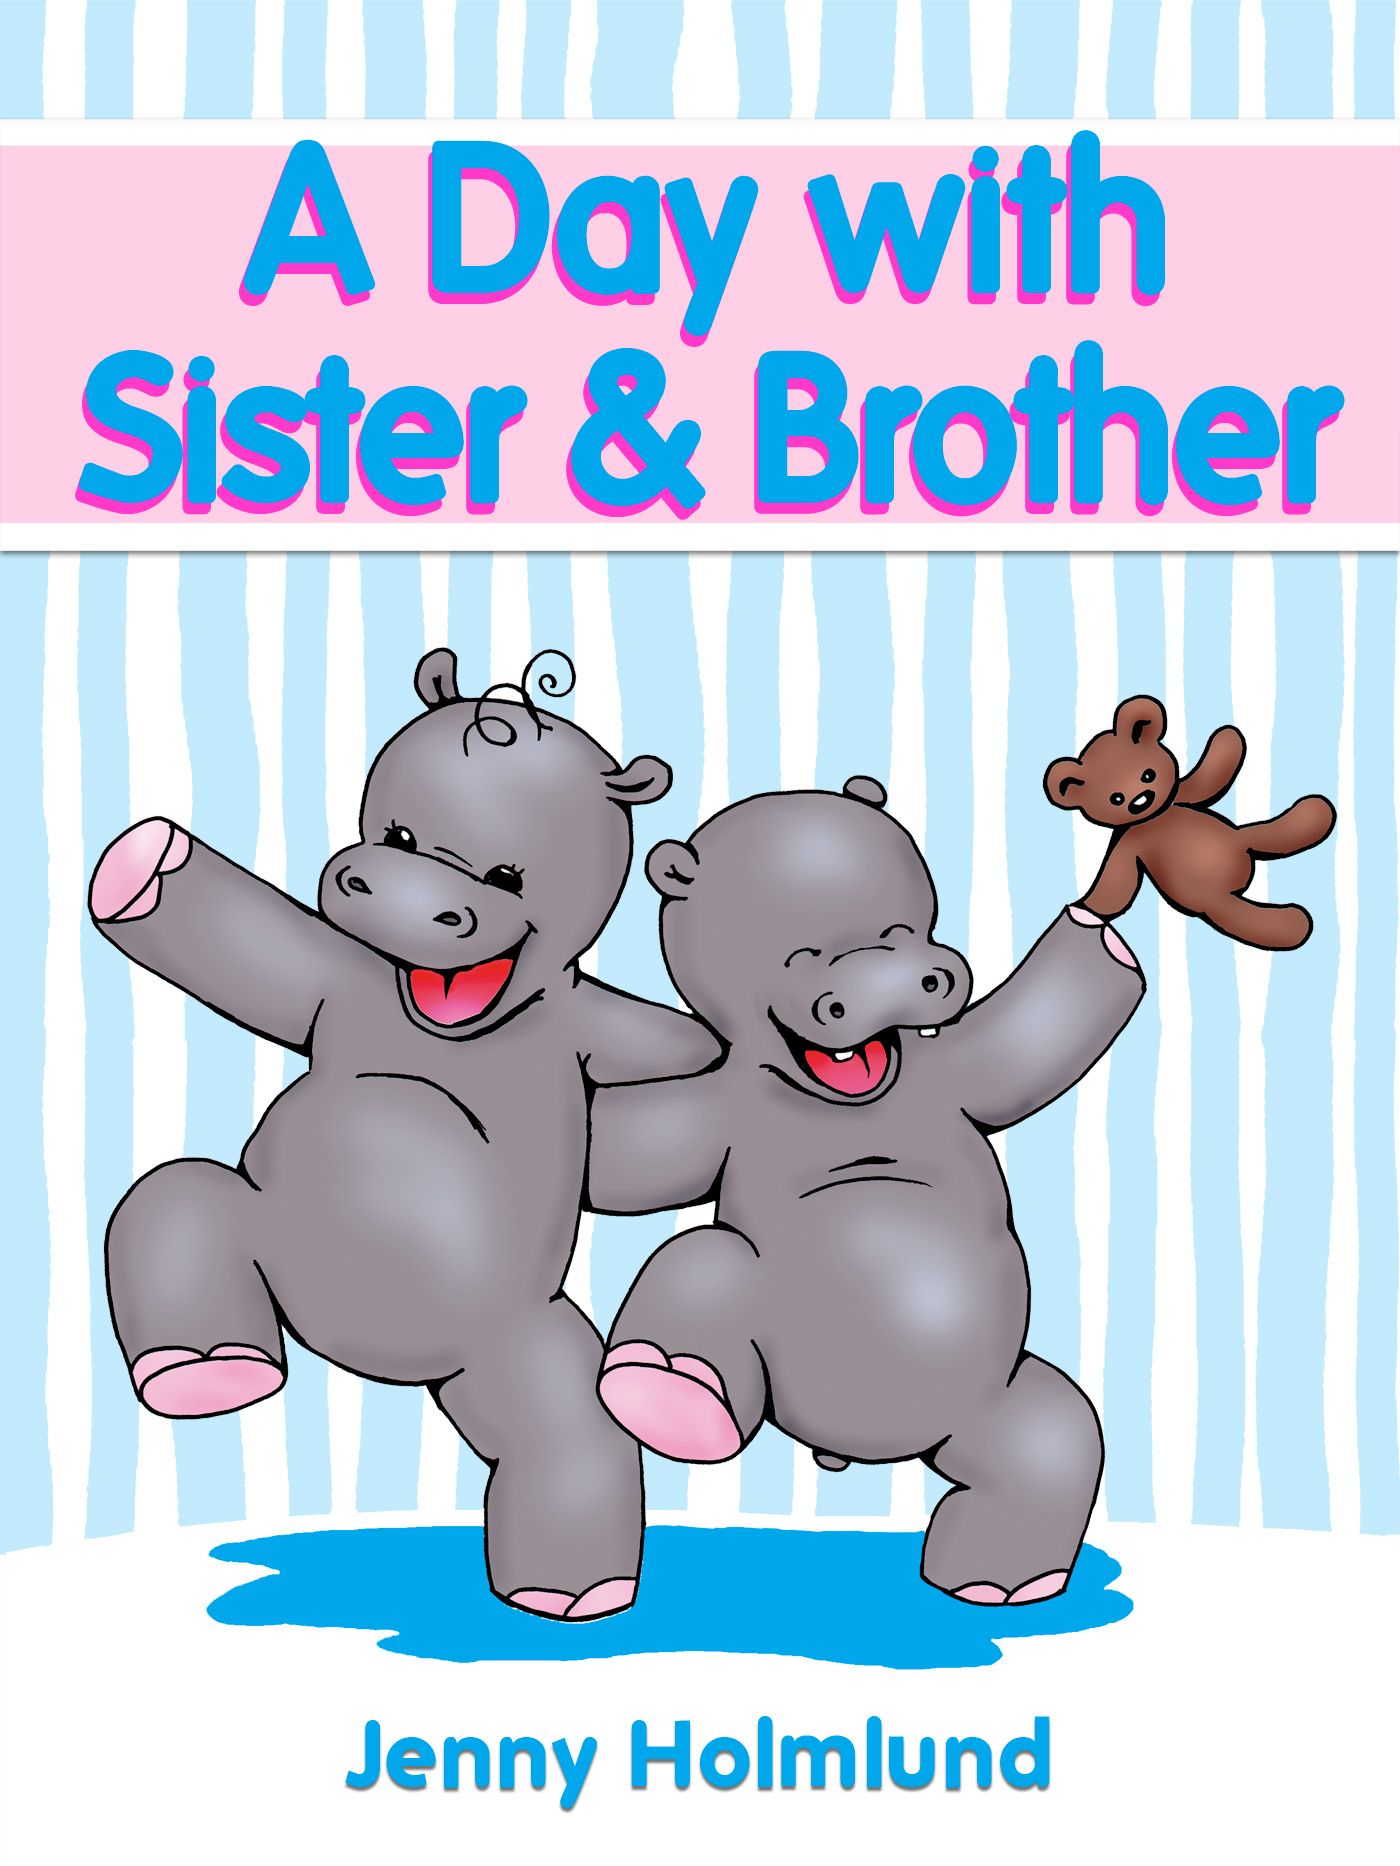 A Day with Sister & Brother, e-bok av Jenny Holmlund